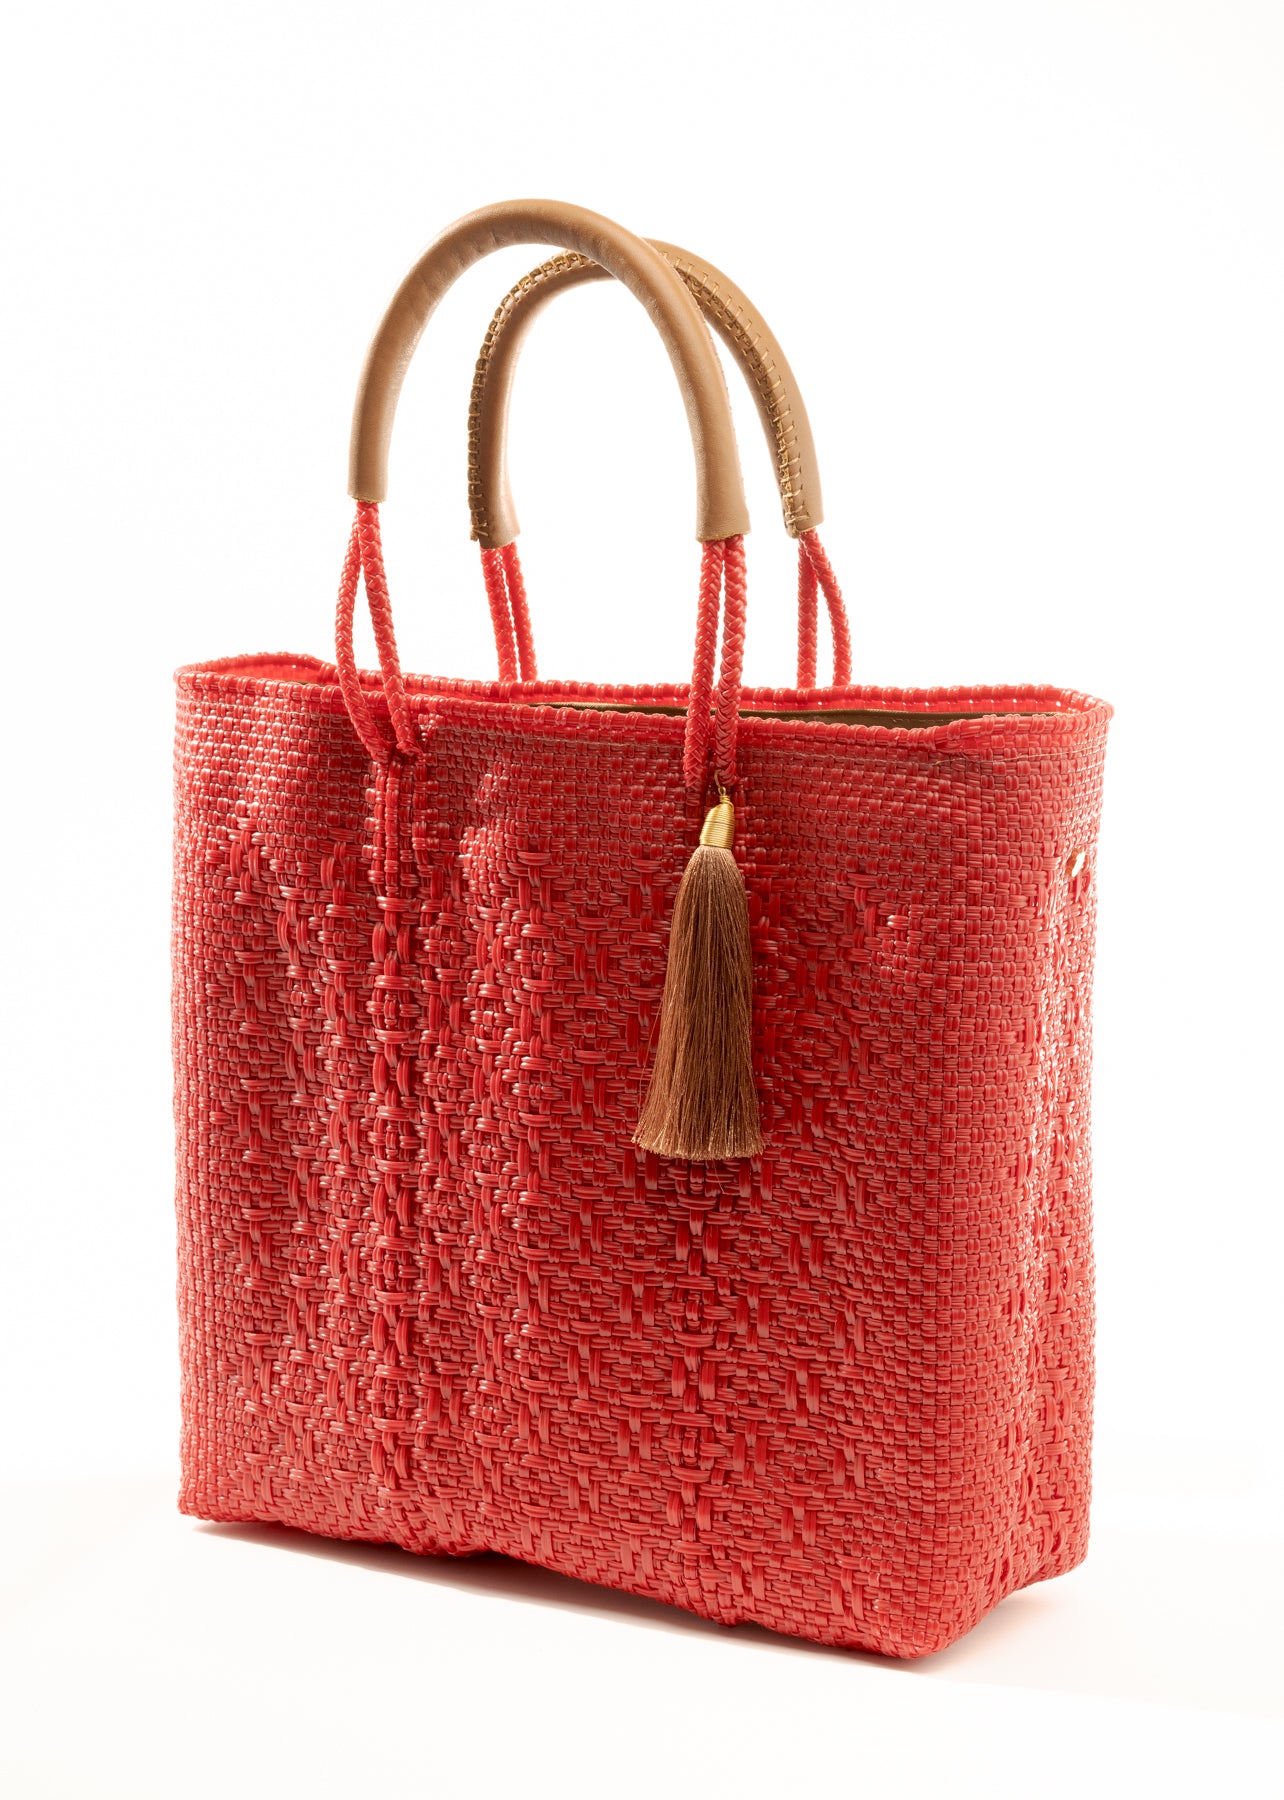 Angled view of red woven bucket bag made from recycled plastics with tan leather handle and tassel